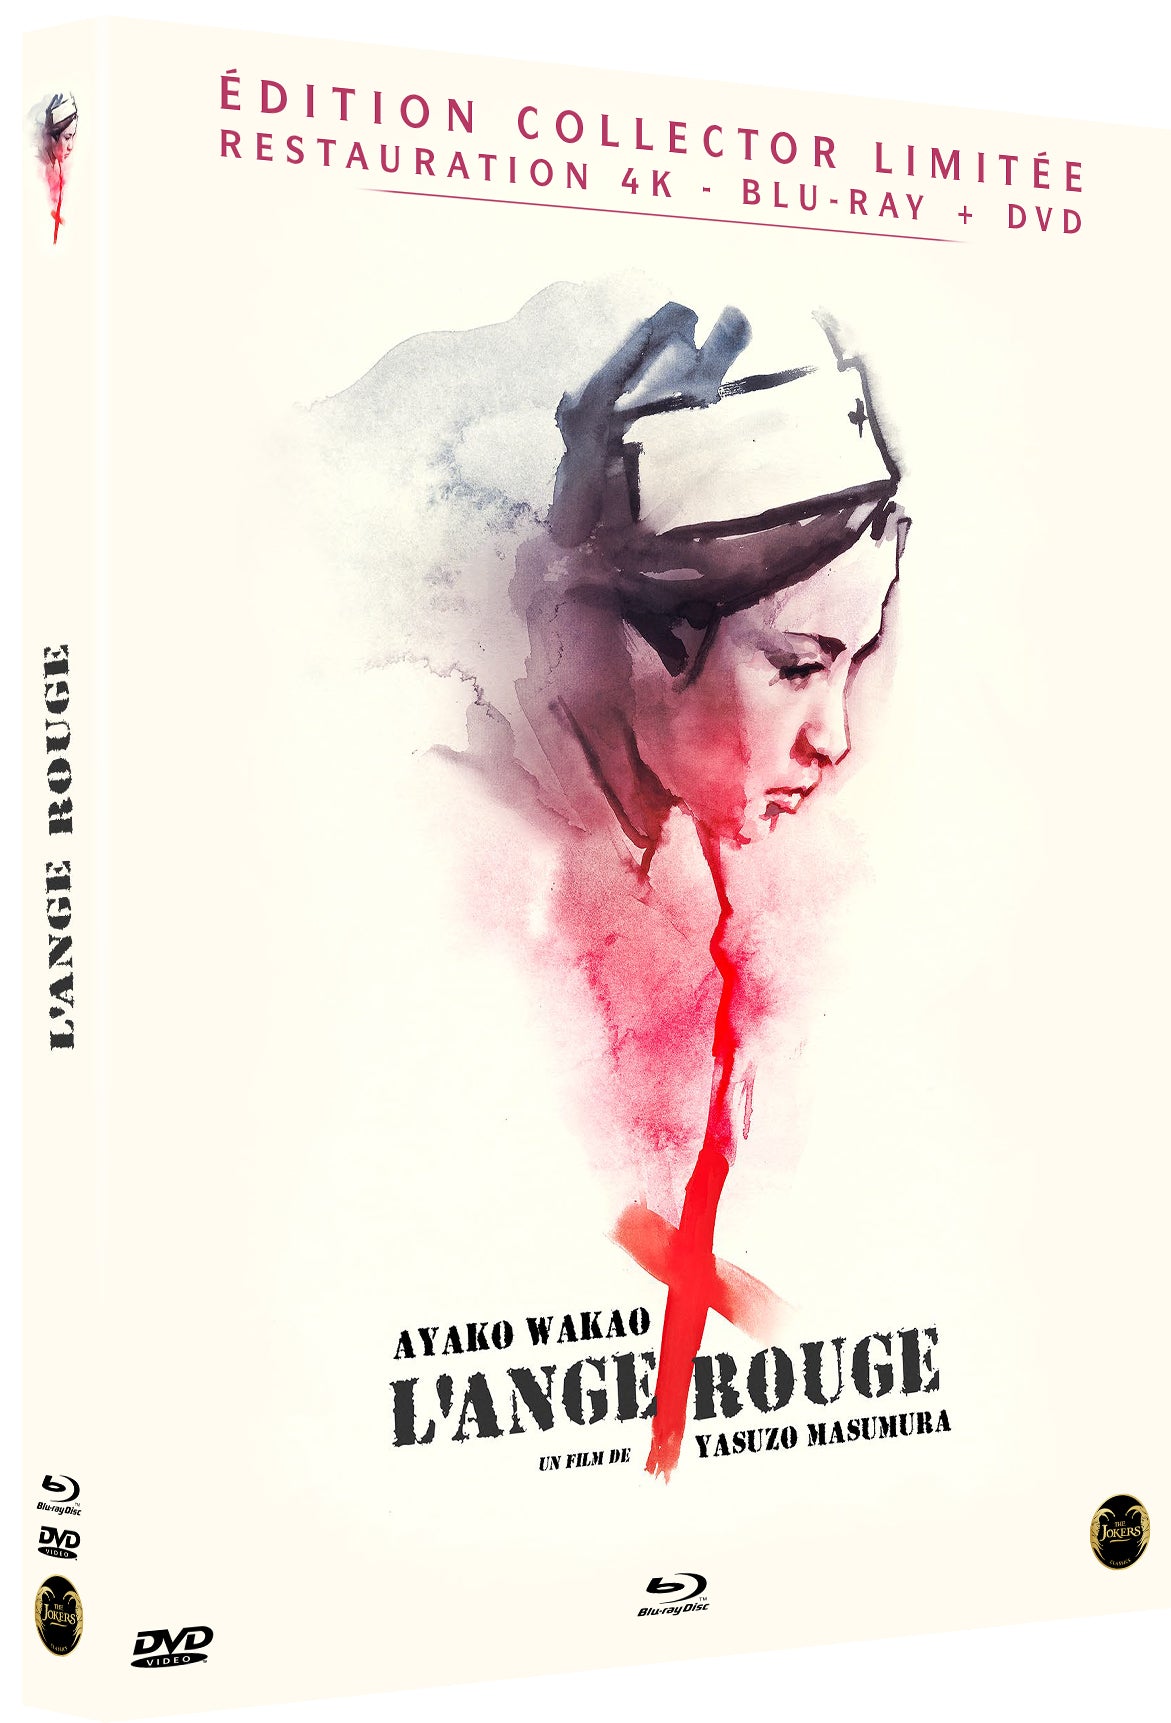 Digipack collector (Blu-Ray + DVD) "L'Ange Rouge"